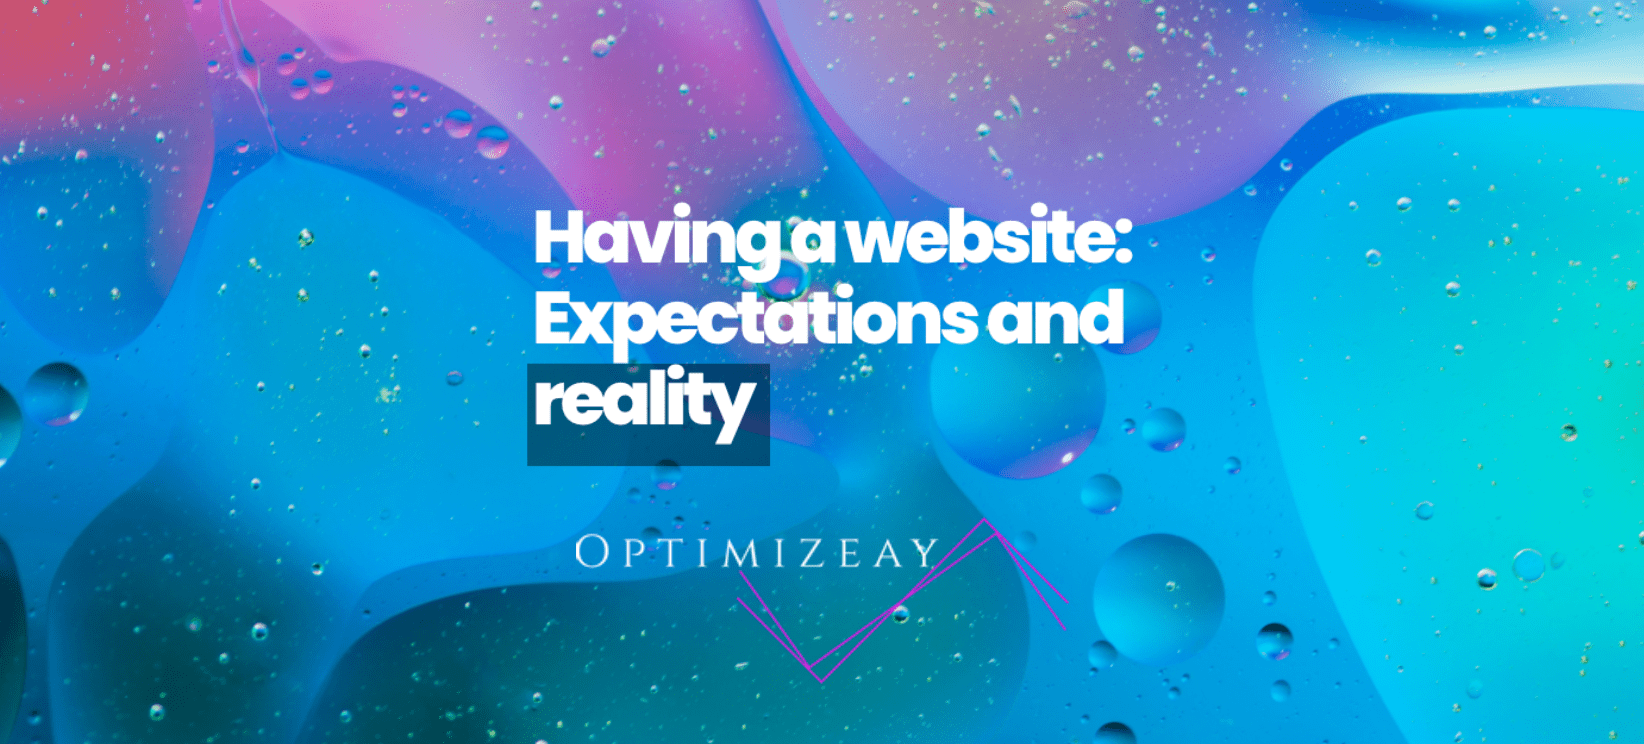 Having a website: Expectations and reality